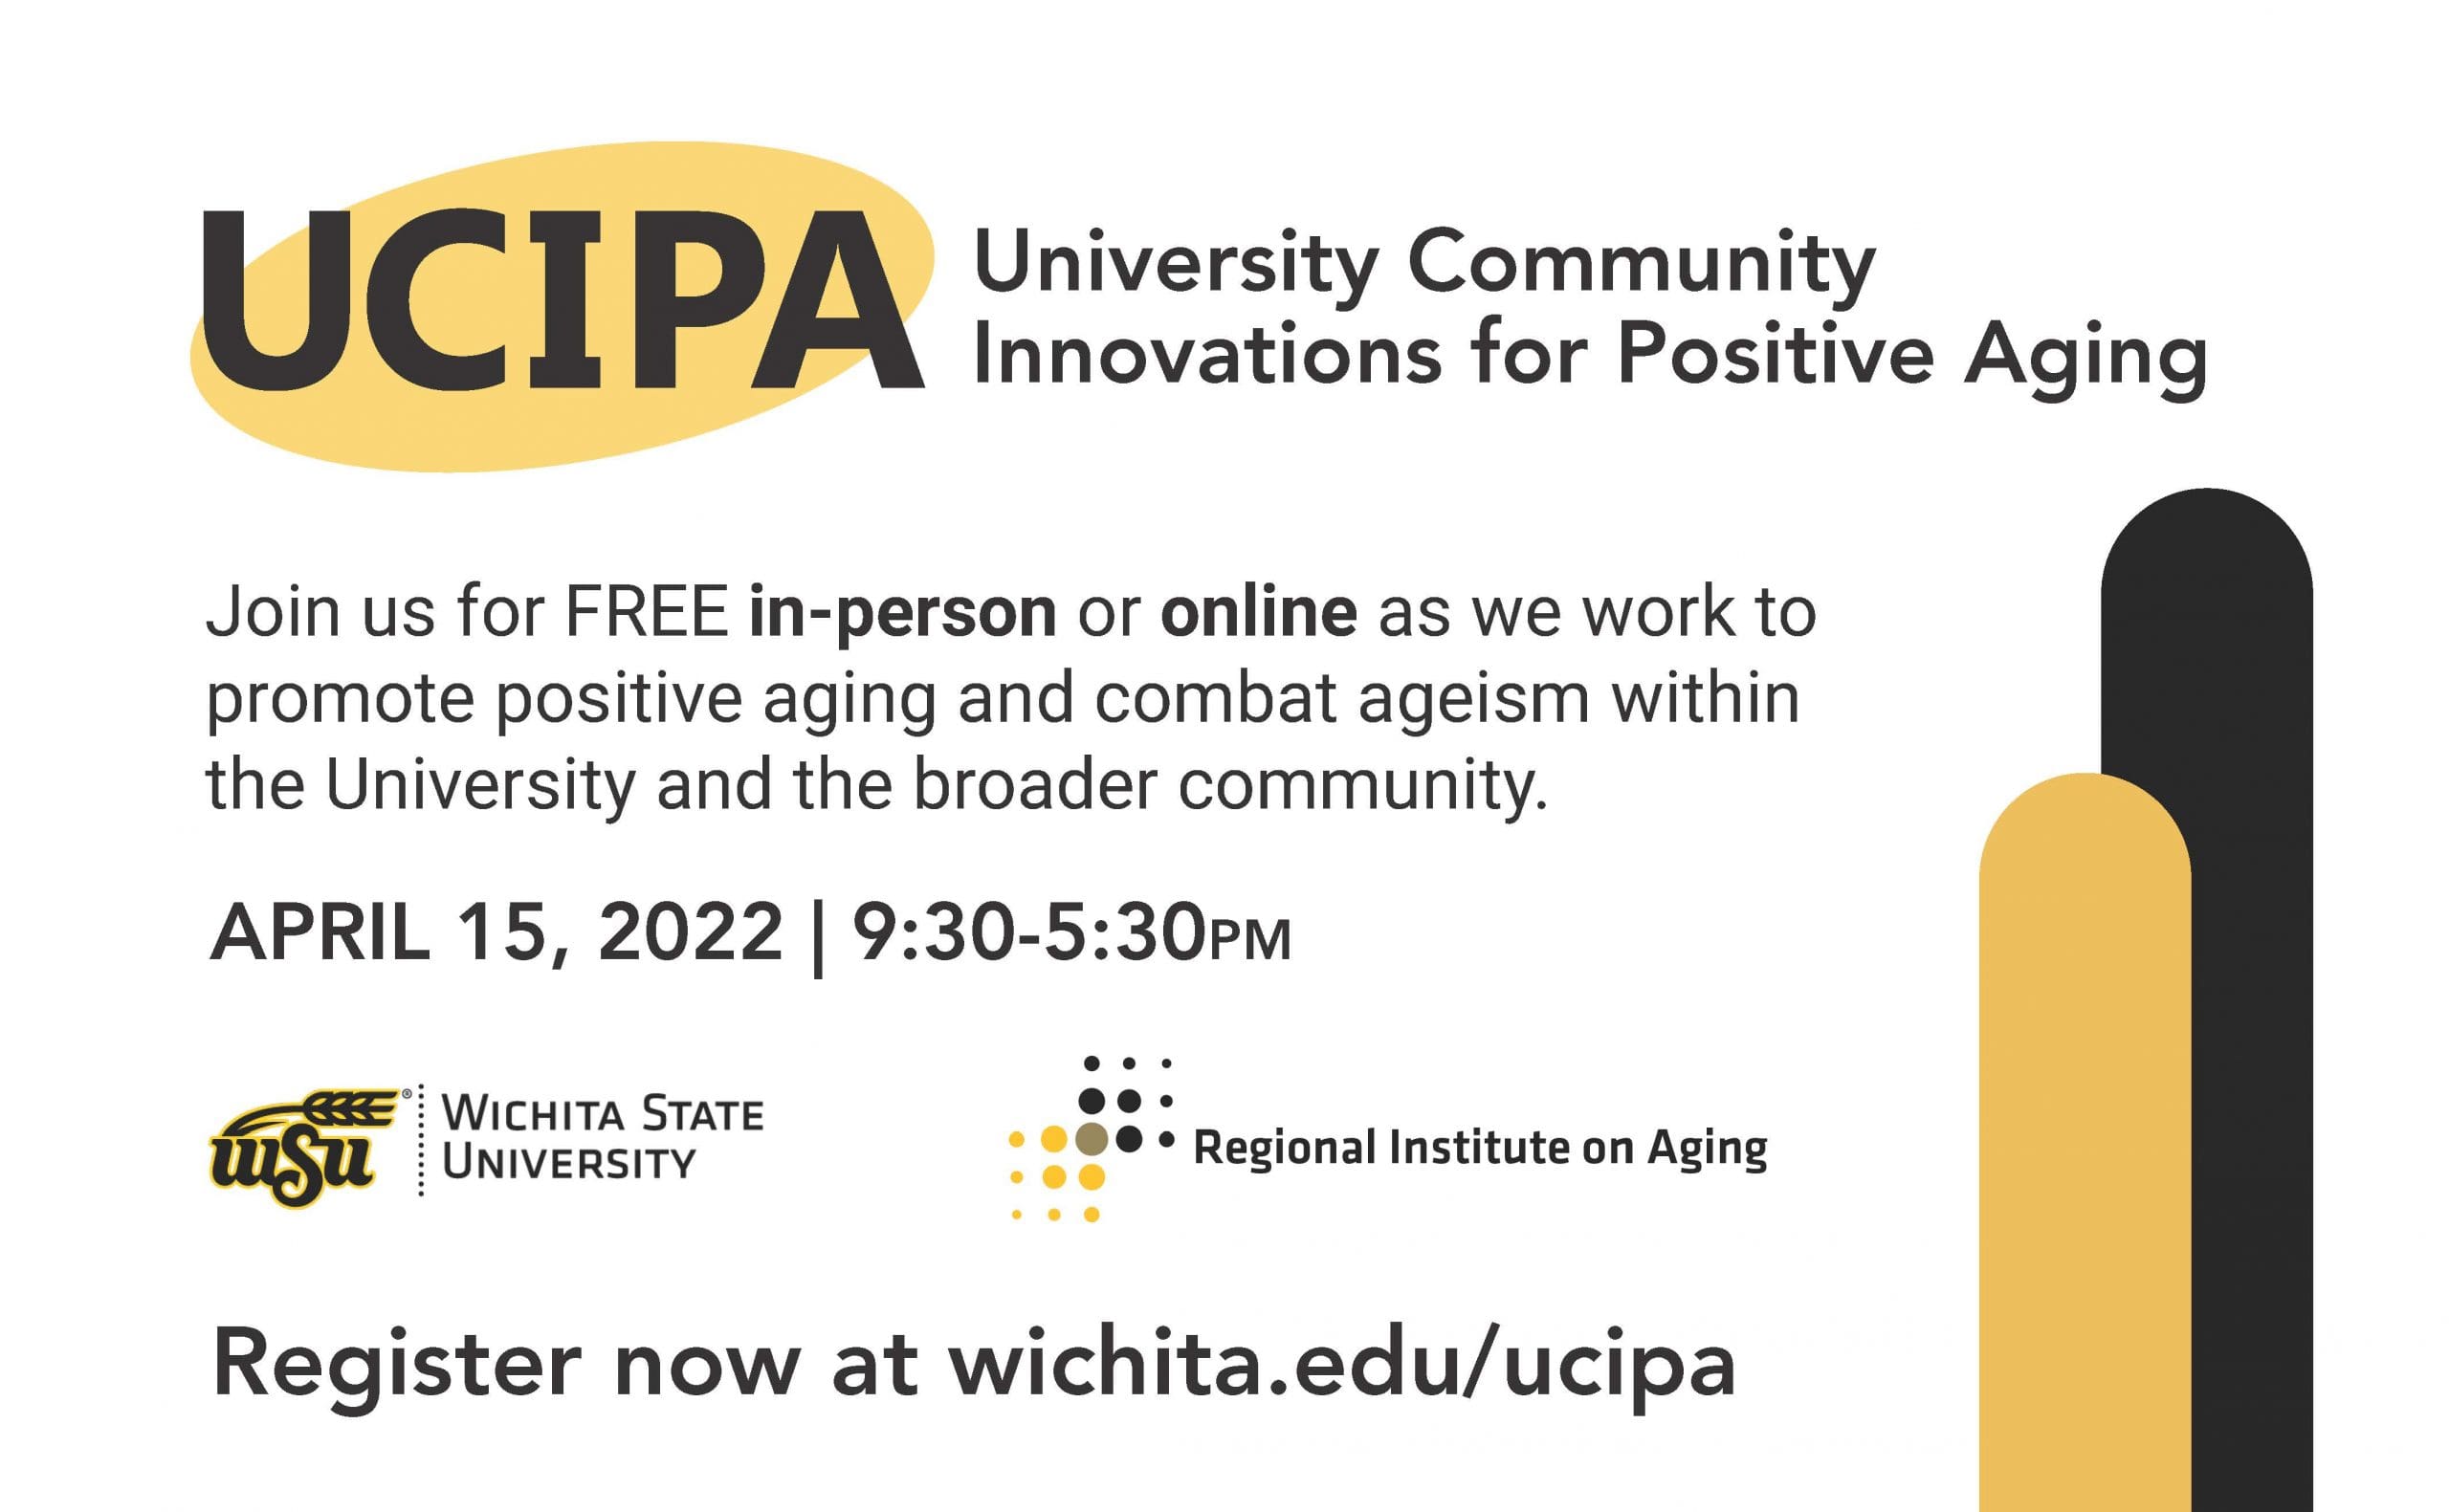 UCIPA: University Community Innovations for Positive Aging. Join us for FREE in-person or online as we work to promote positive aging and combat ageism within the University and the broader community. April 15, 2022, 9:30-5:30 pm, Register now at wichit.edu/ucipa